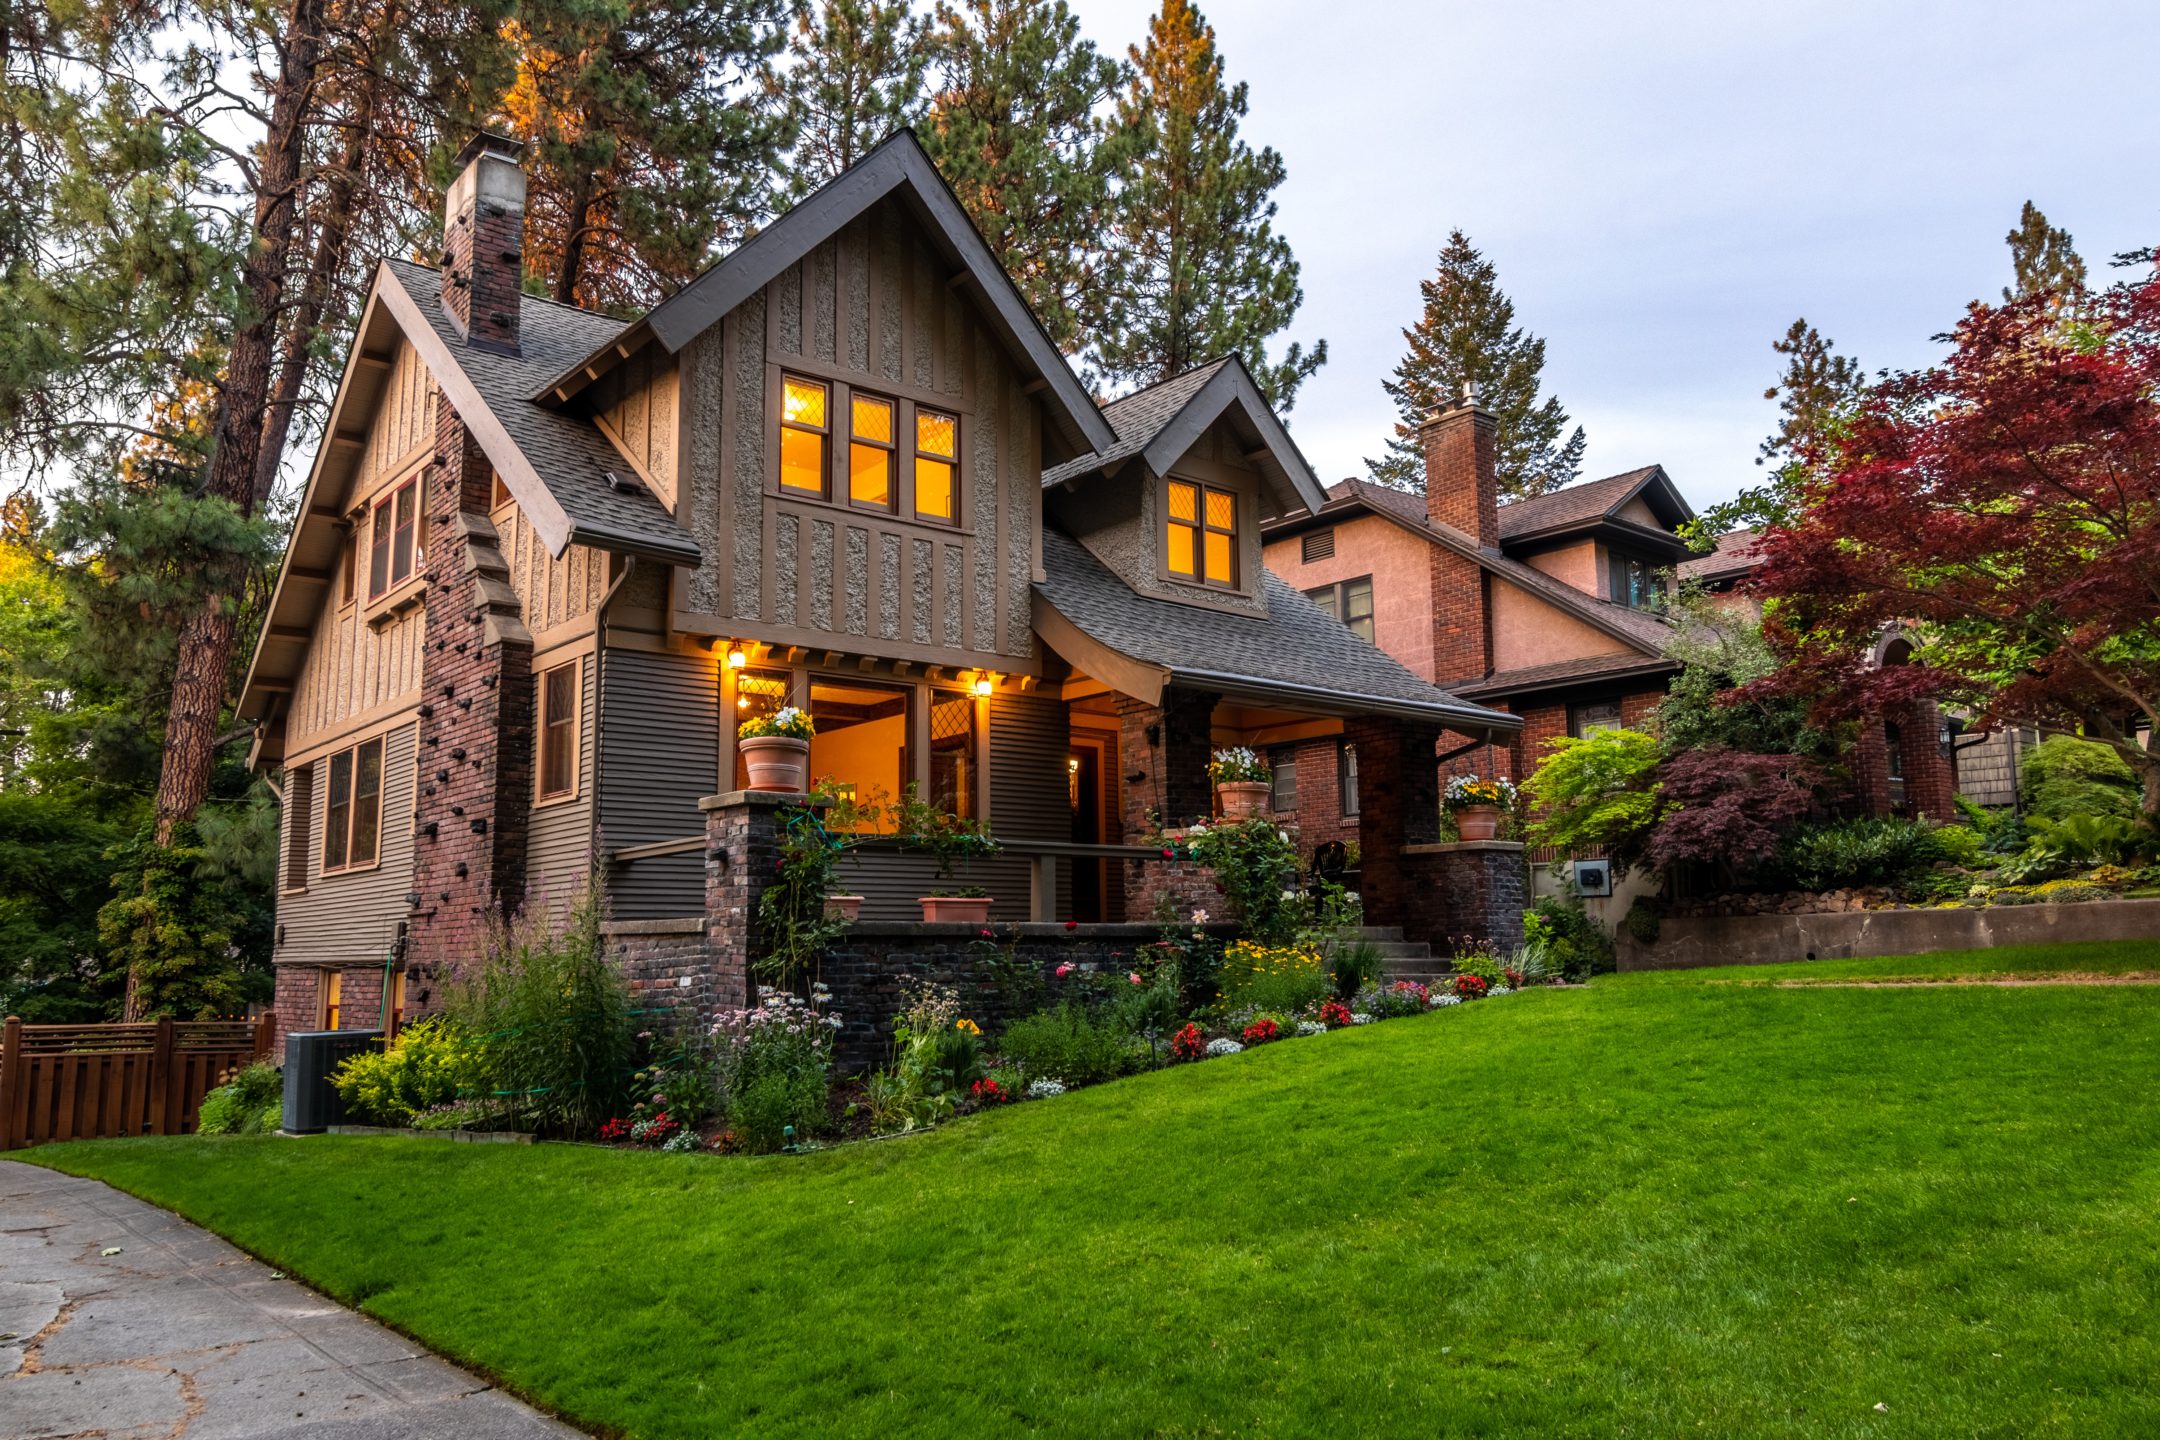 7 Reasons Your Home Is Your Best Investment